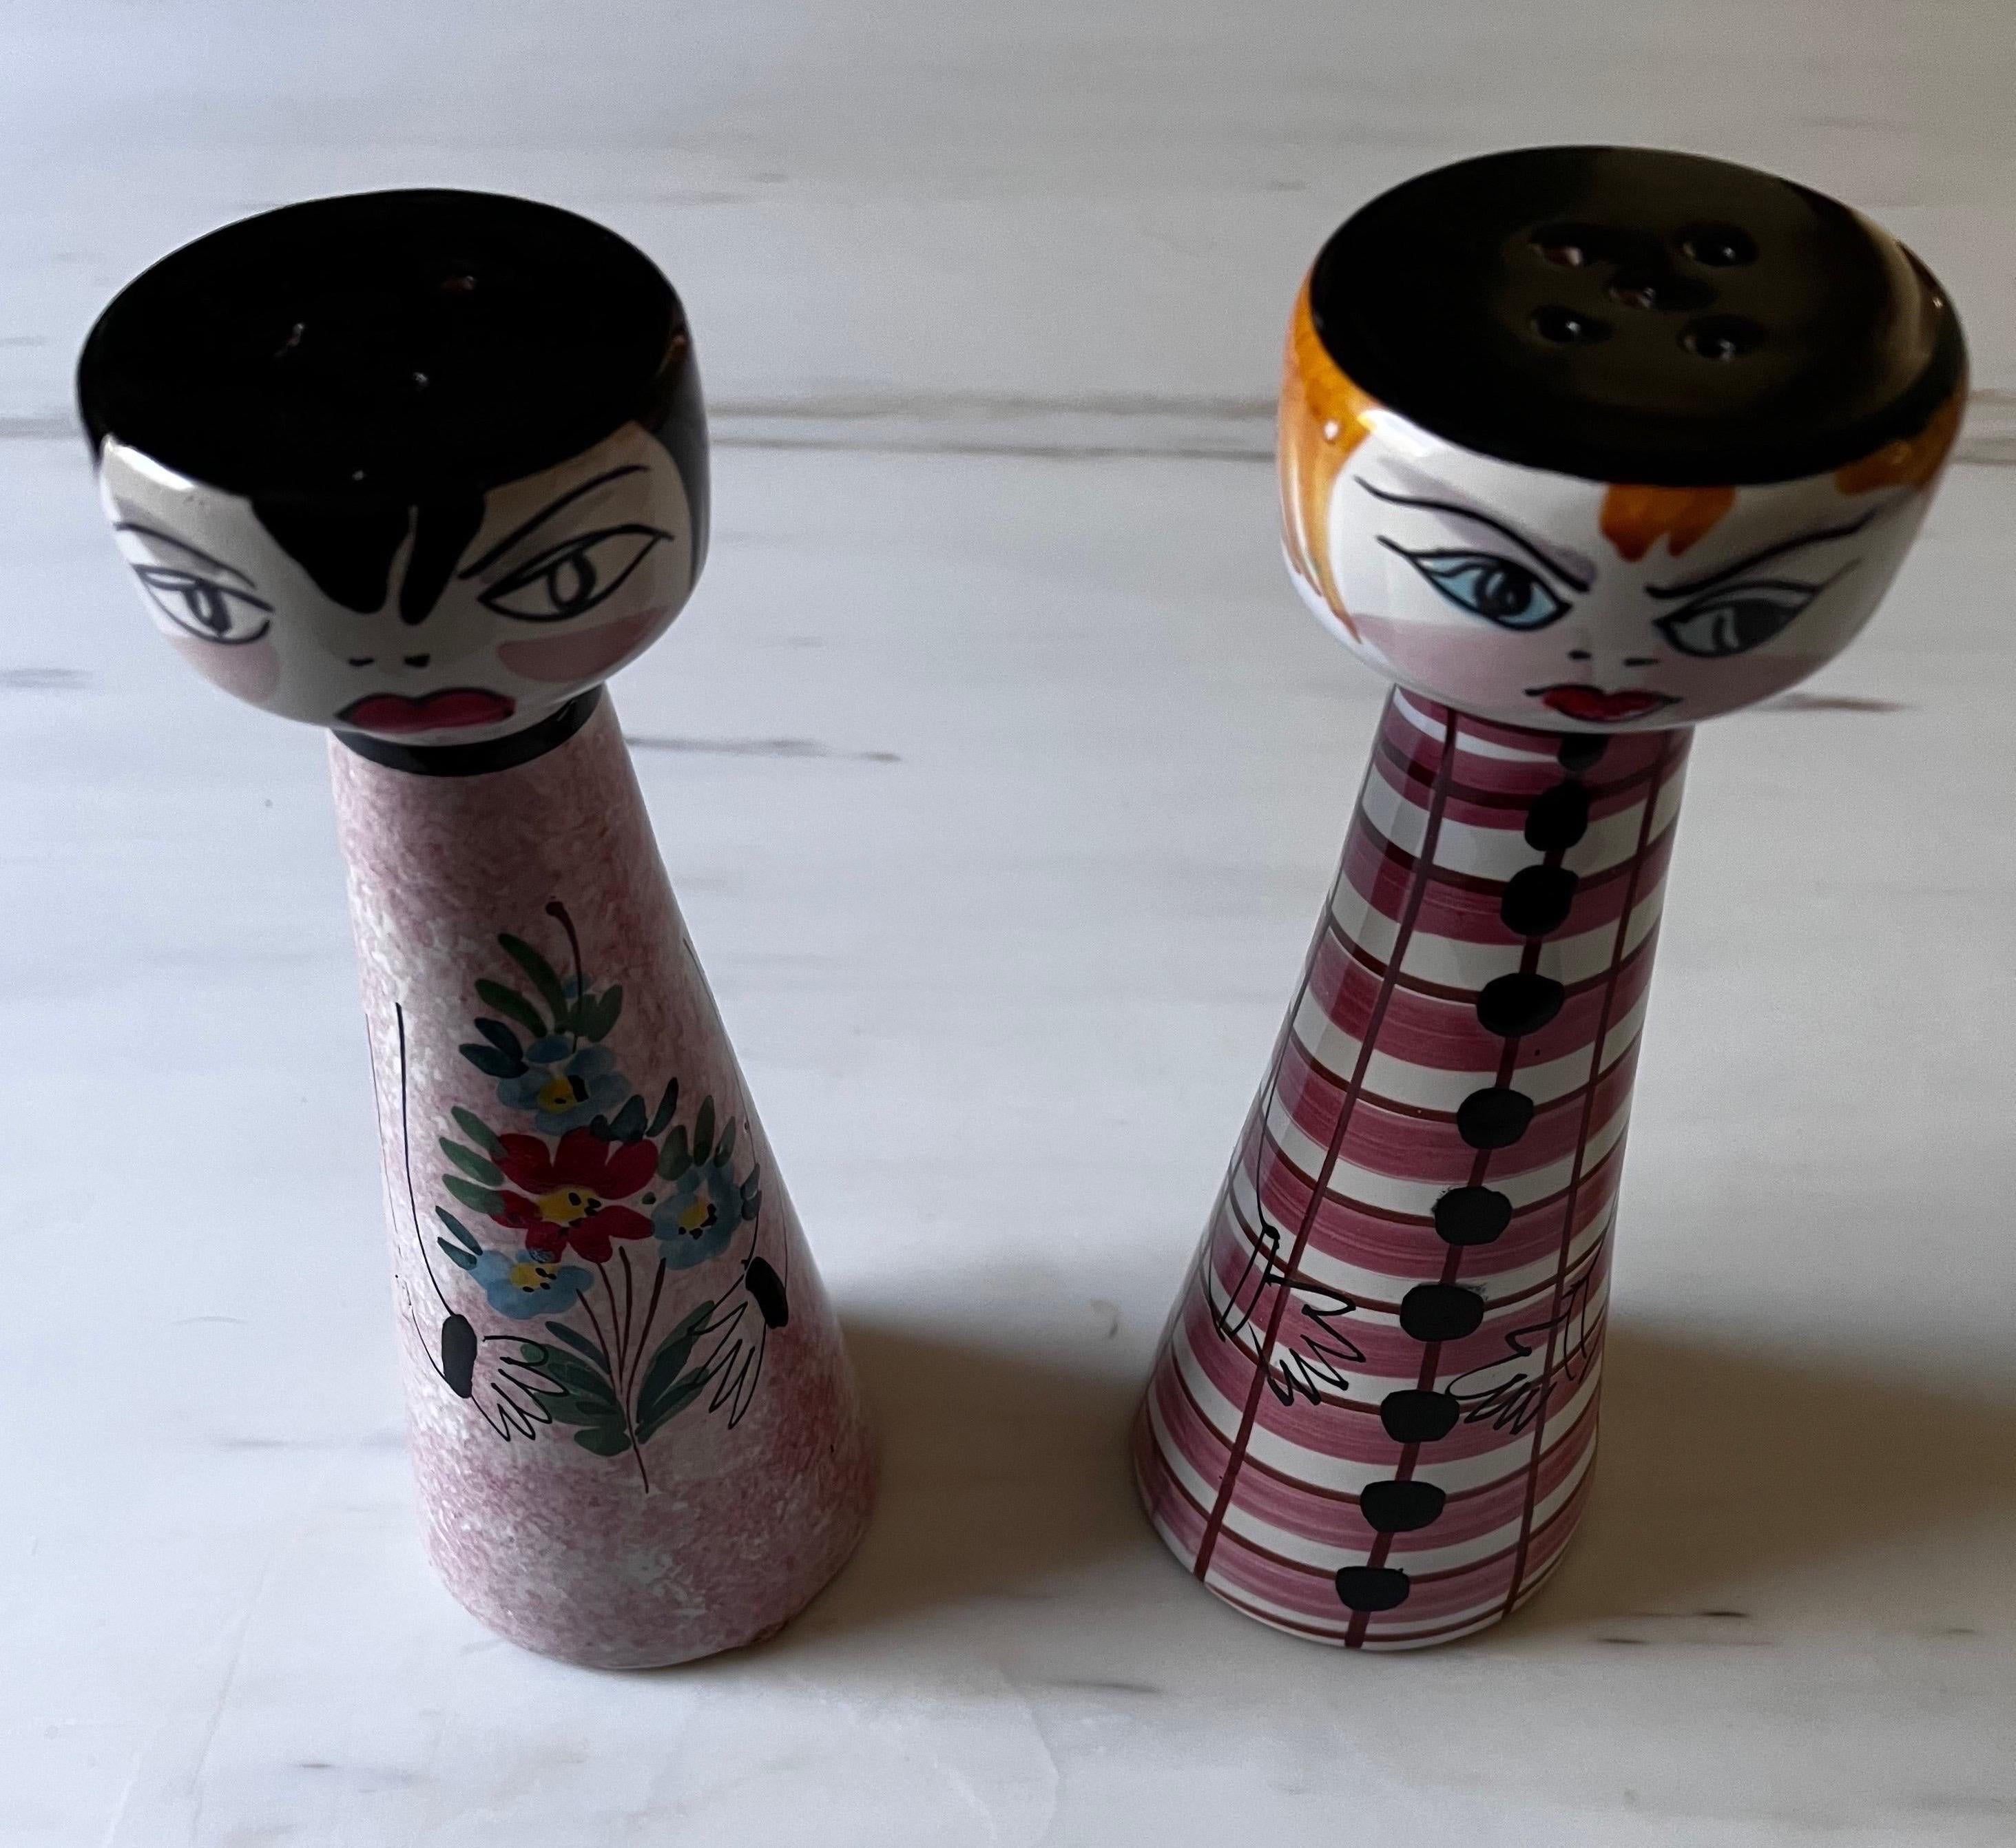 Pair of Vintage Whimsical Italian Ceramic Salt and Pepper Shakers.
Small chip on the bottom on one of the shakers - not visible when standing up.

These will add some interest to any dinner party.